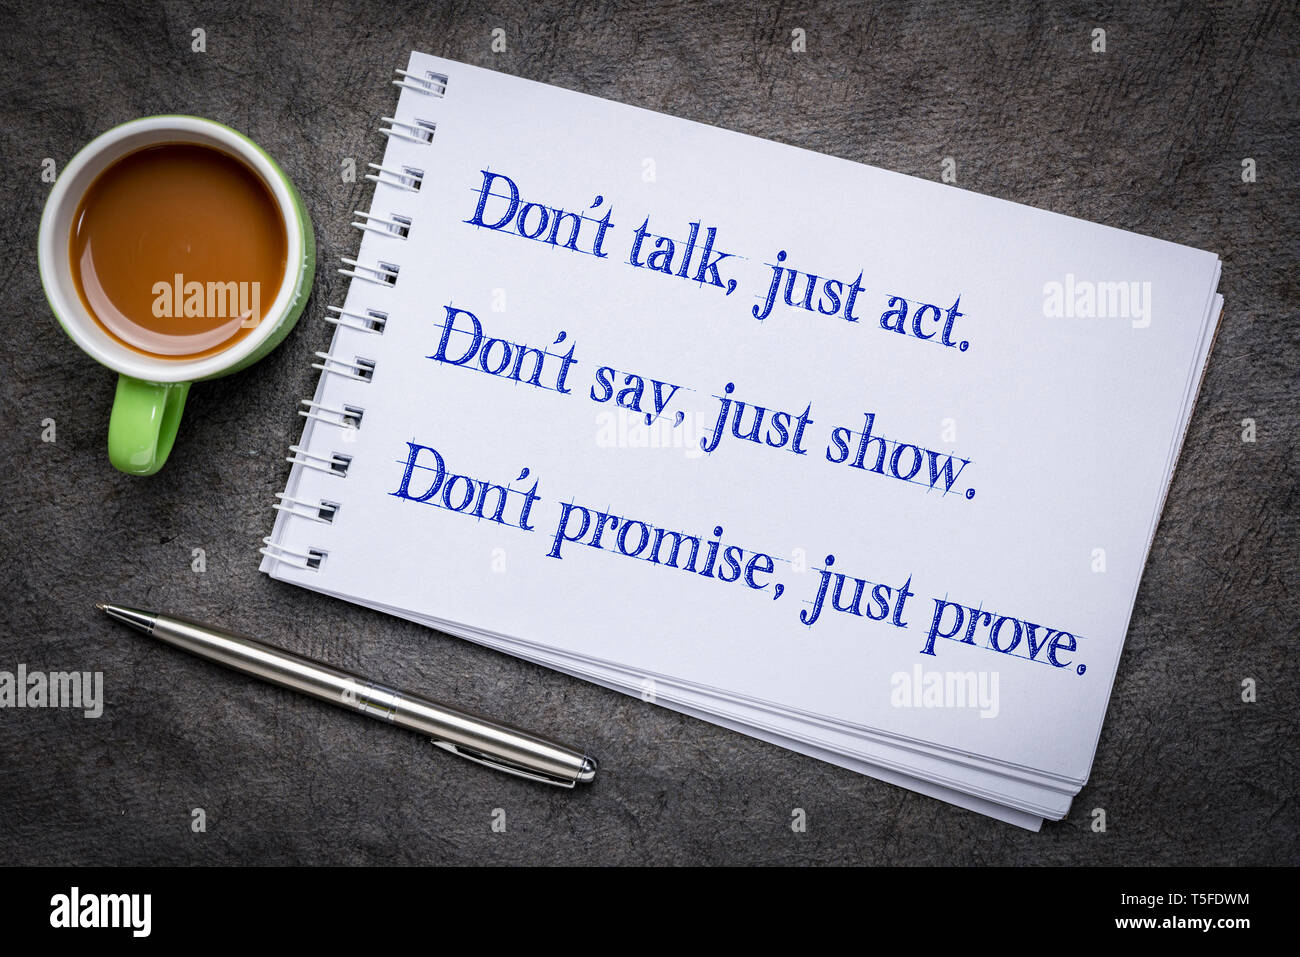 Do Nt Talk Just Act Don T Say Just Show Don T Promise Just Prove Motivational Andwritingi N An Art Sketchbook With Acup Of Coffee Stock Photo Alamy